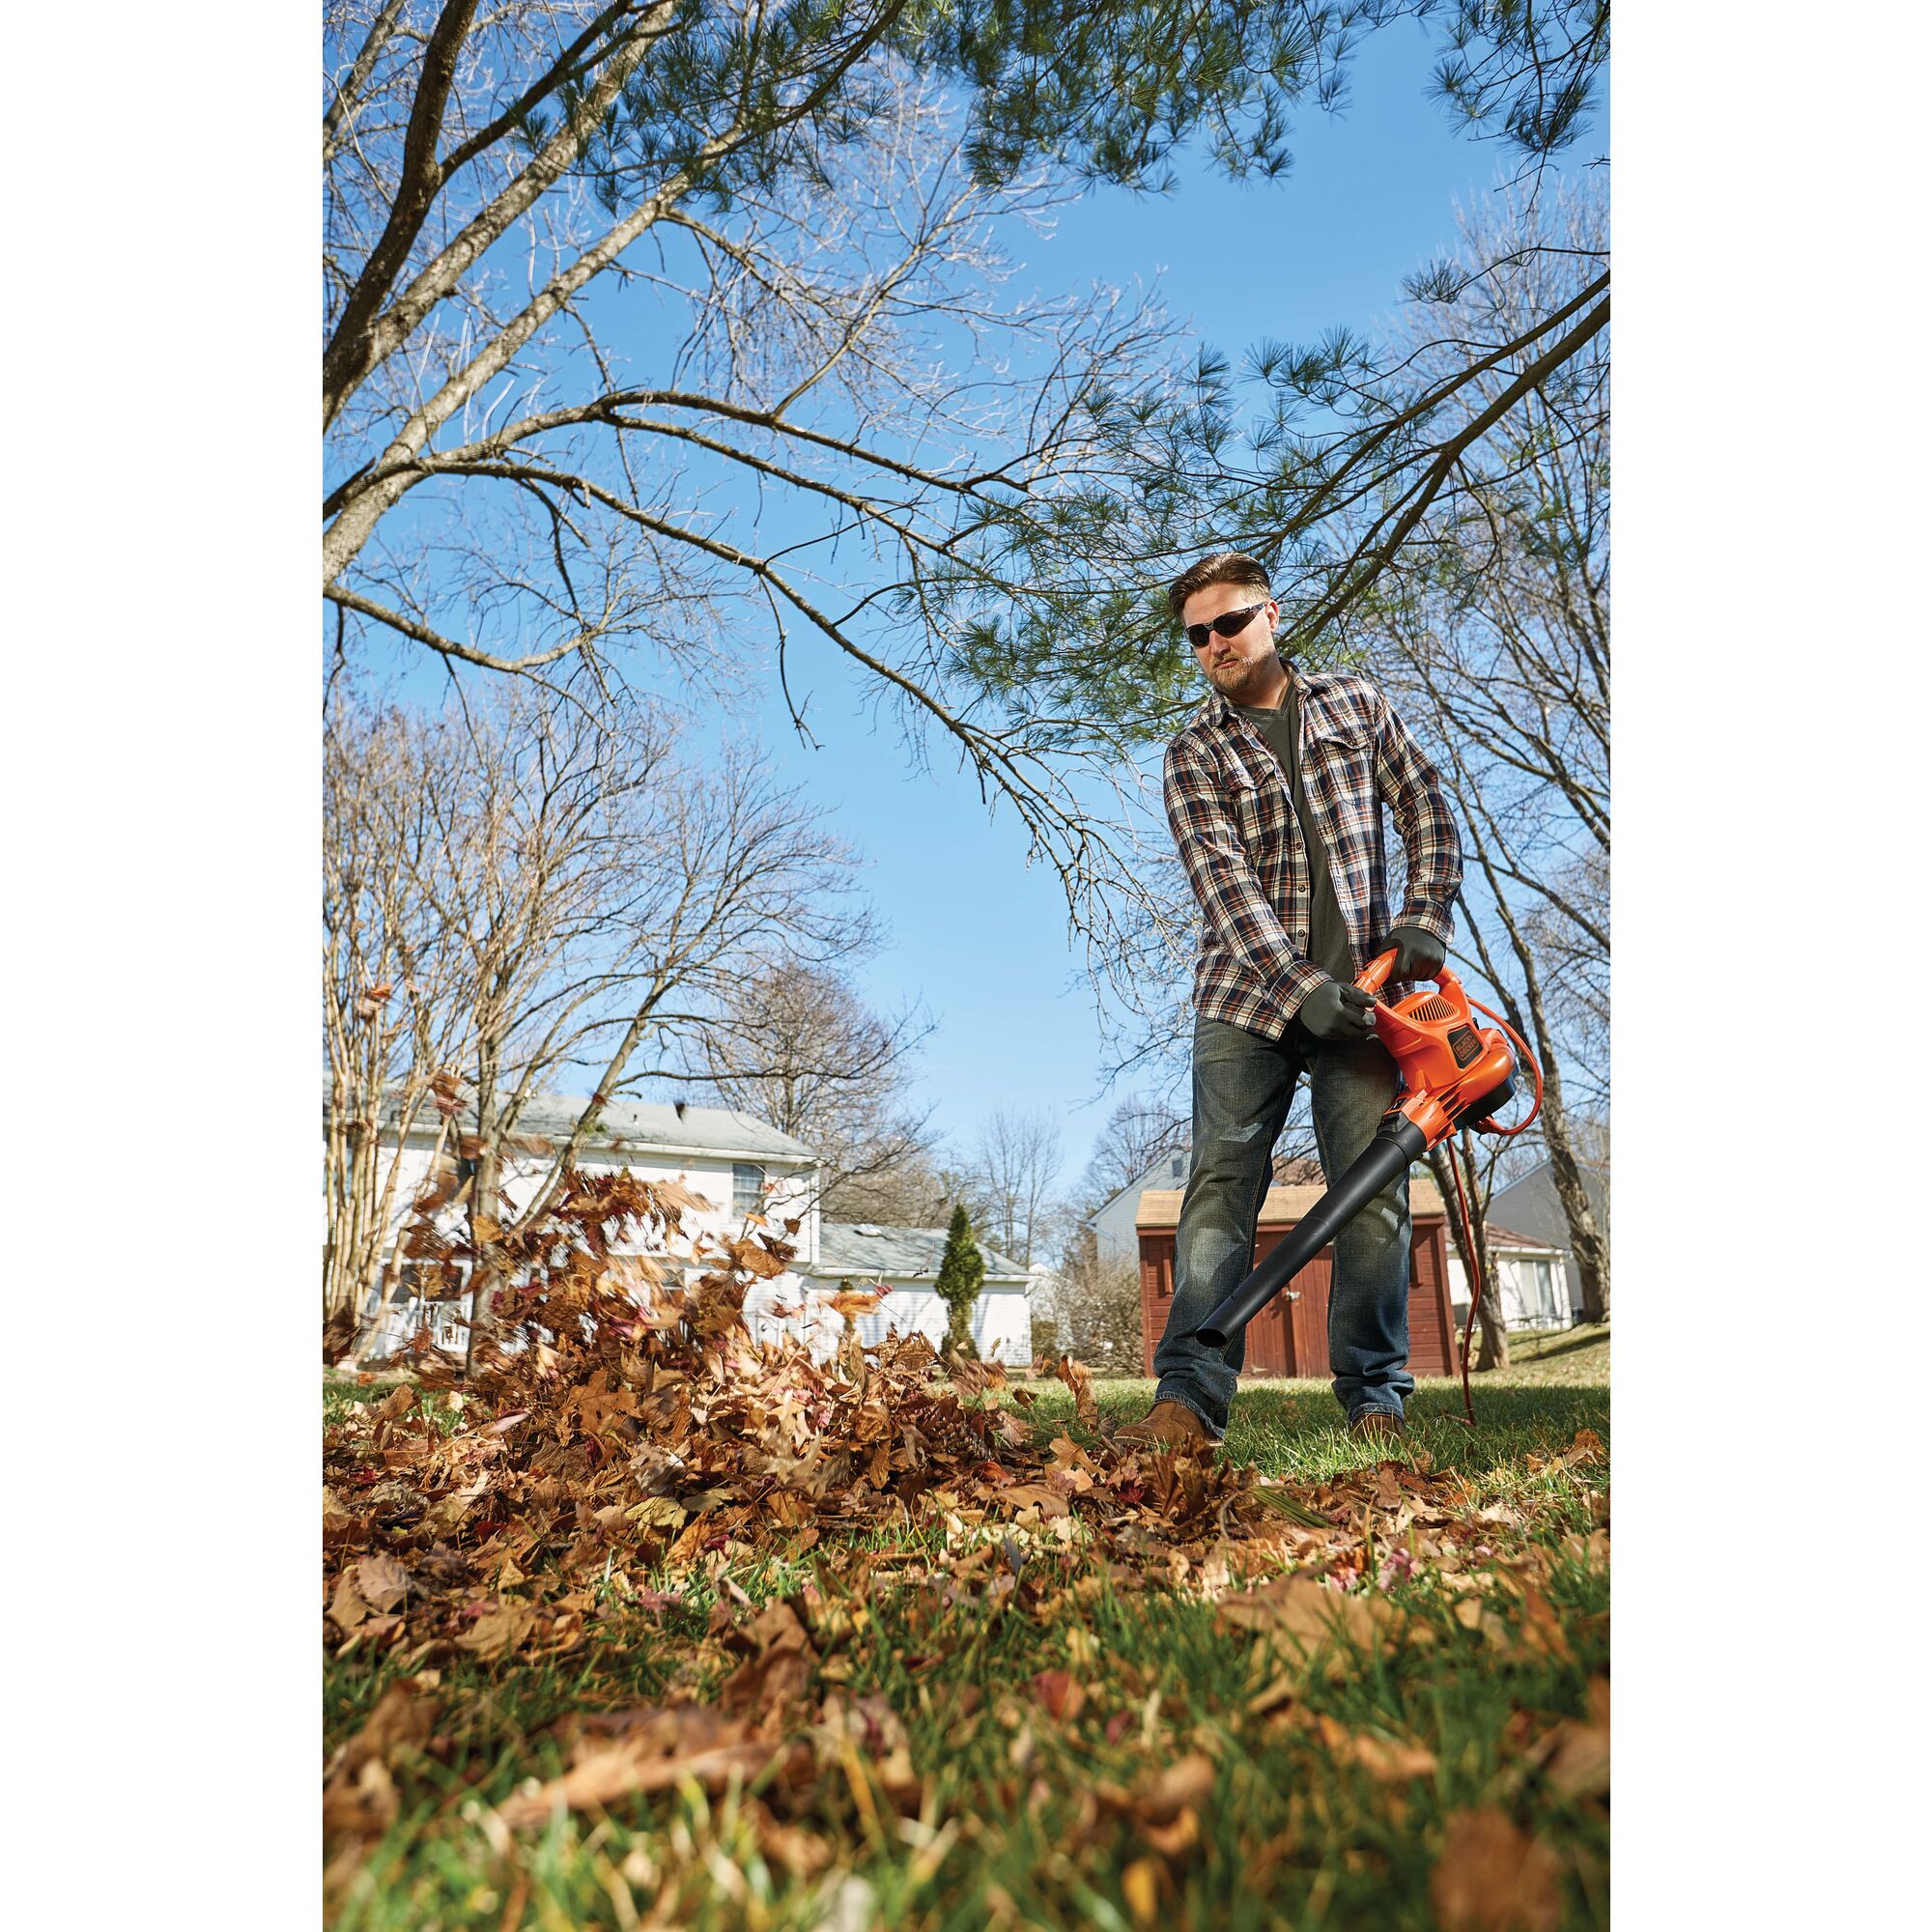 3 in 1 VAC PACK 12 Amp leaf blower, vacuum, and mulcher being used by a person to pick up leaves in yard. 